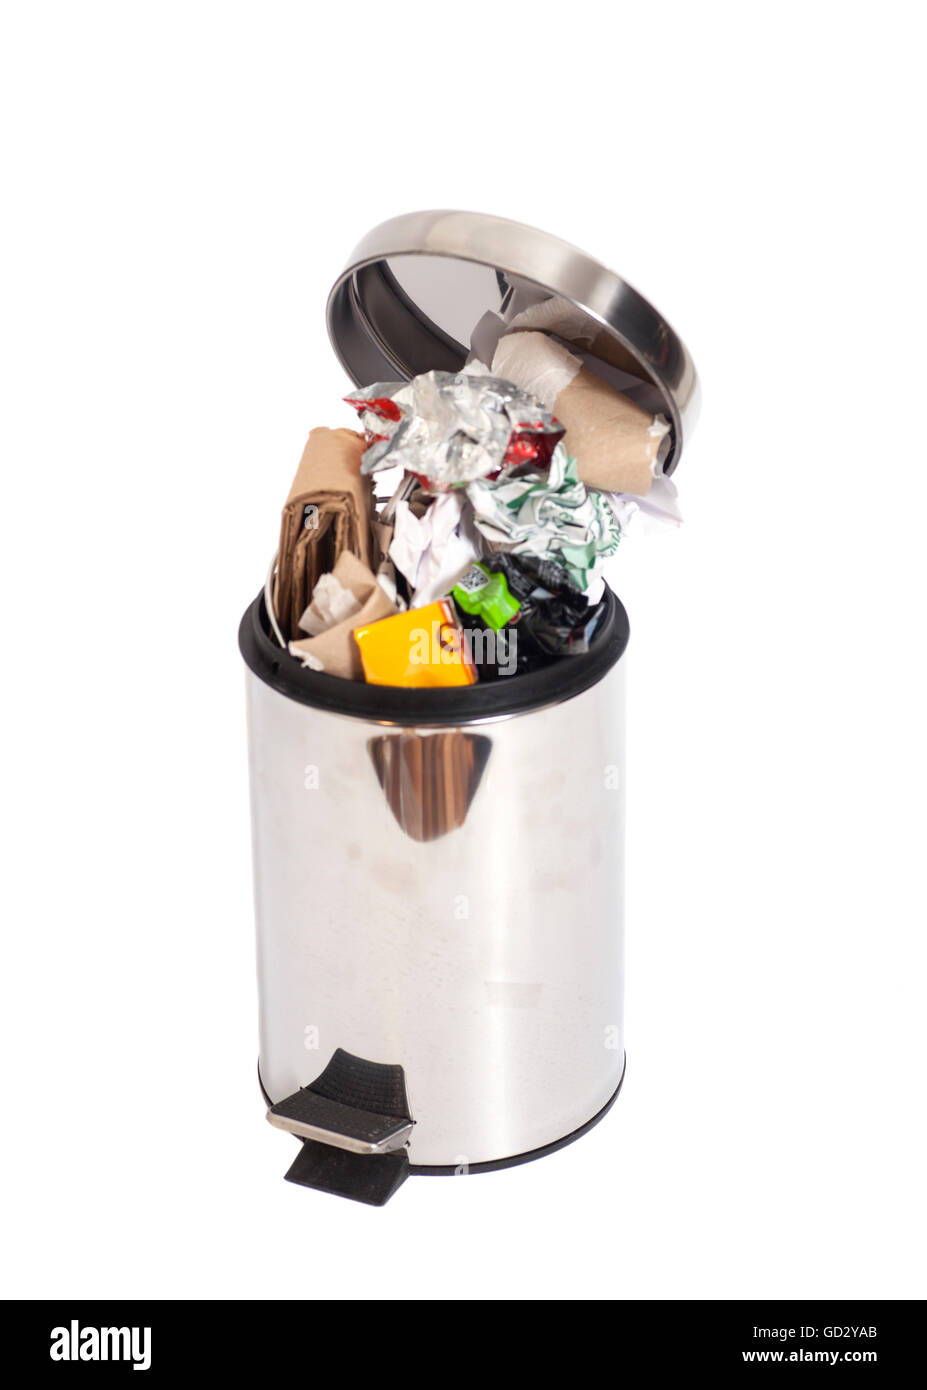 Garbage bin full of rubbish isolated on white Stock Photo